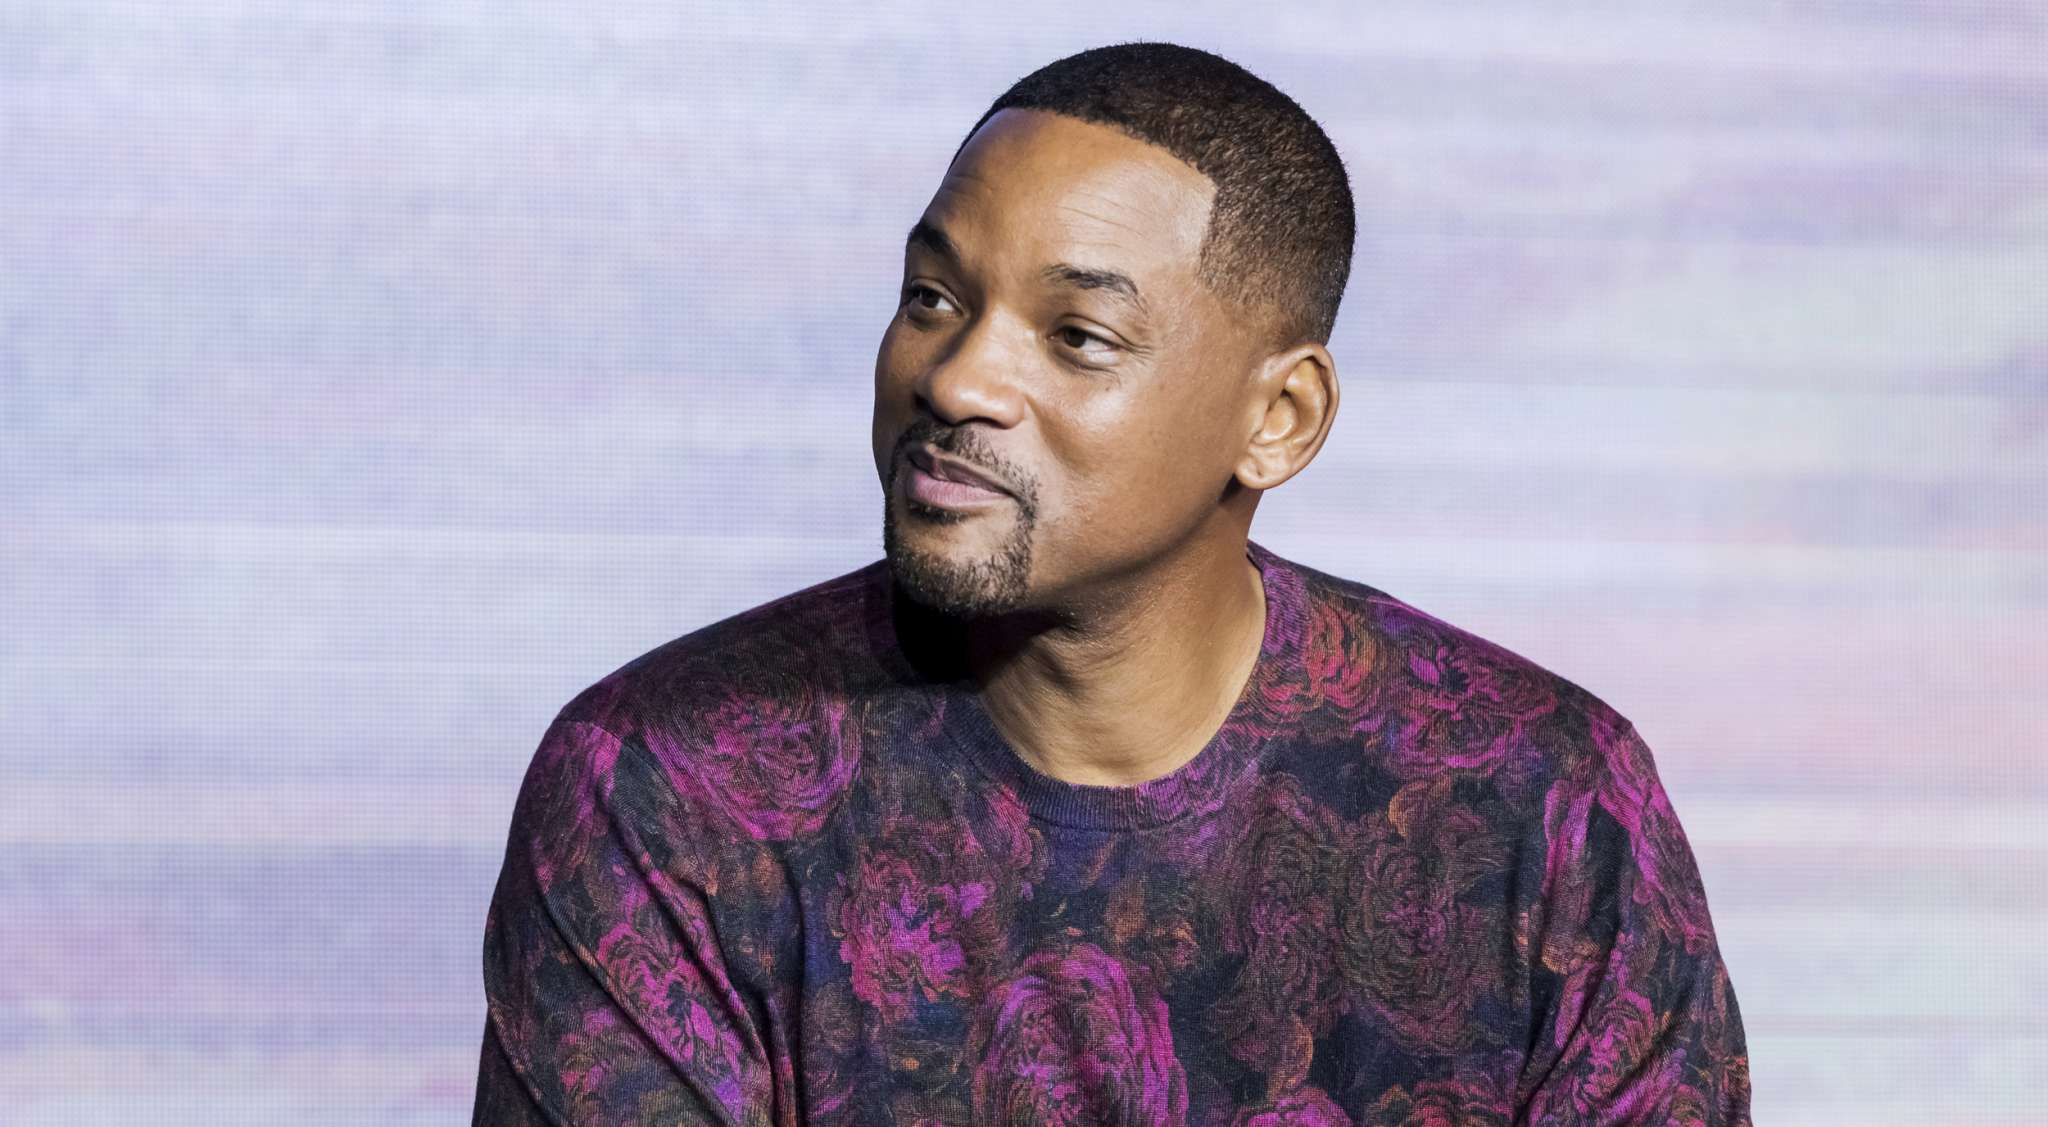 will-smith-breaks-fans-hearts-he-once-considered-taking-his-own-life-see-the-video